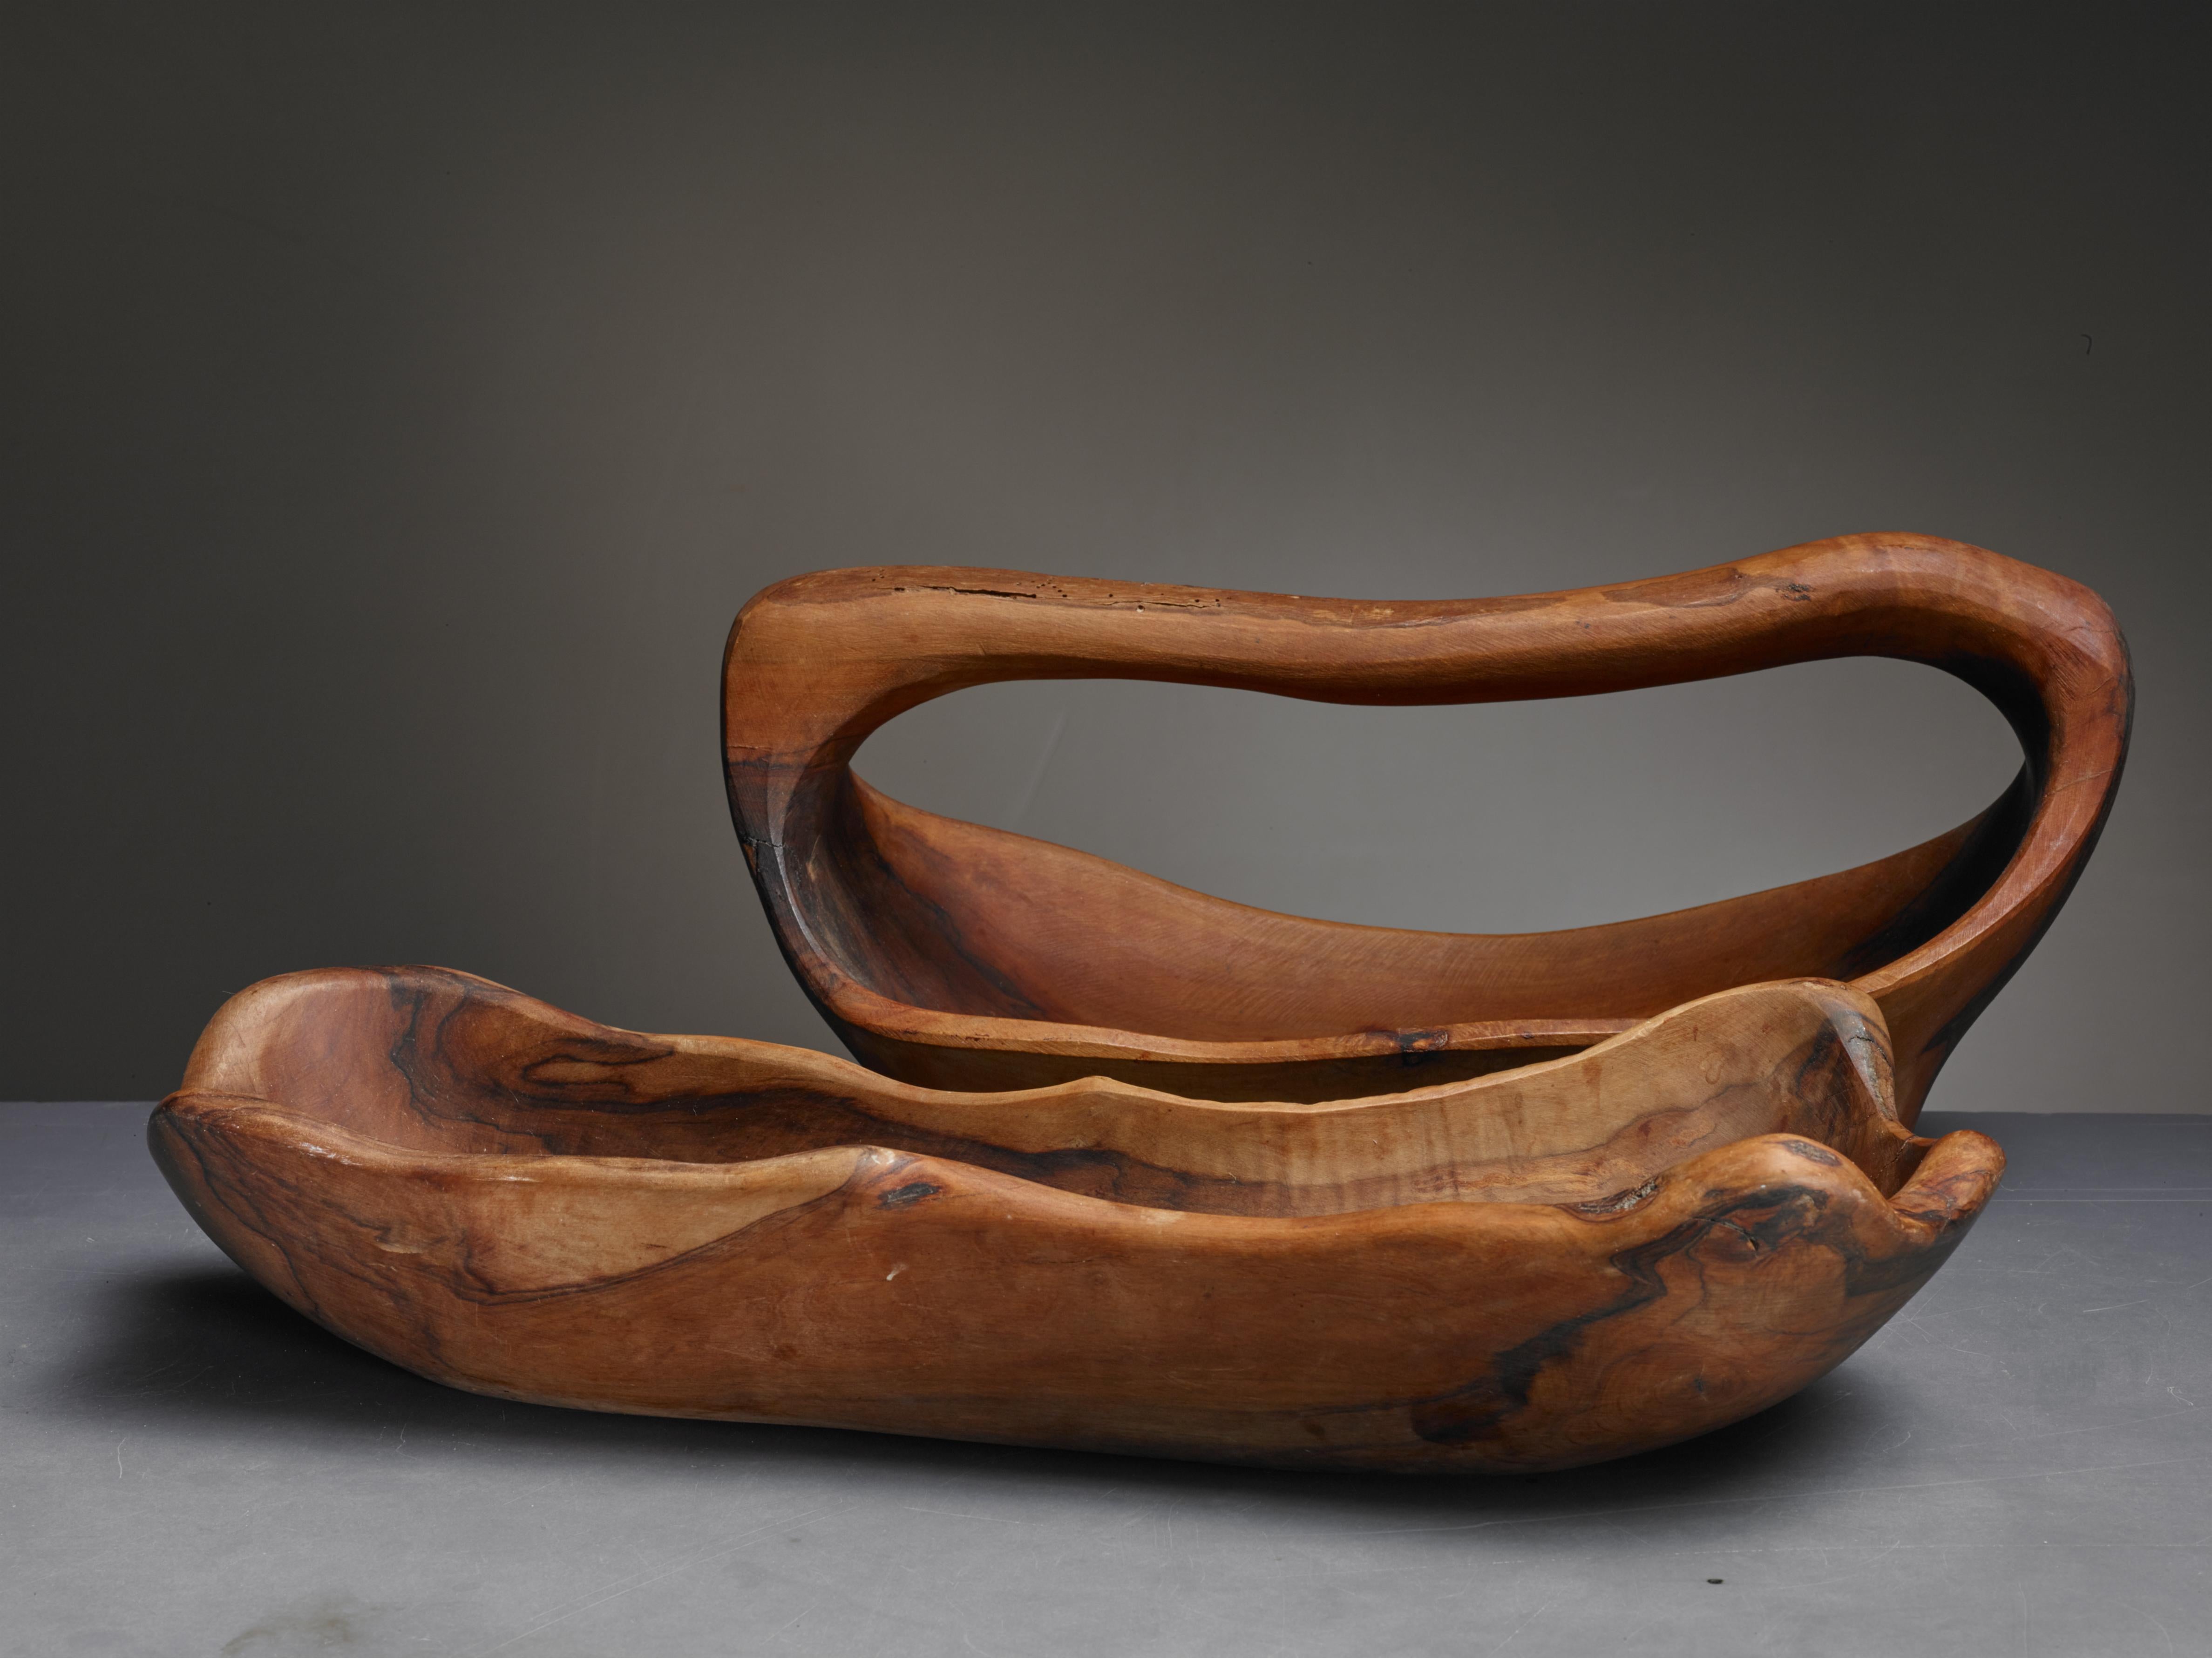 A set of two sculptural, carved wooden bowls from France. Both have a freeform rectangular shape and one has a handle.

The measurements stated are of the bowl without handle. The other one is 34.5 cm (13.5